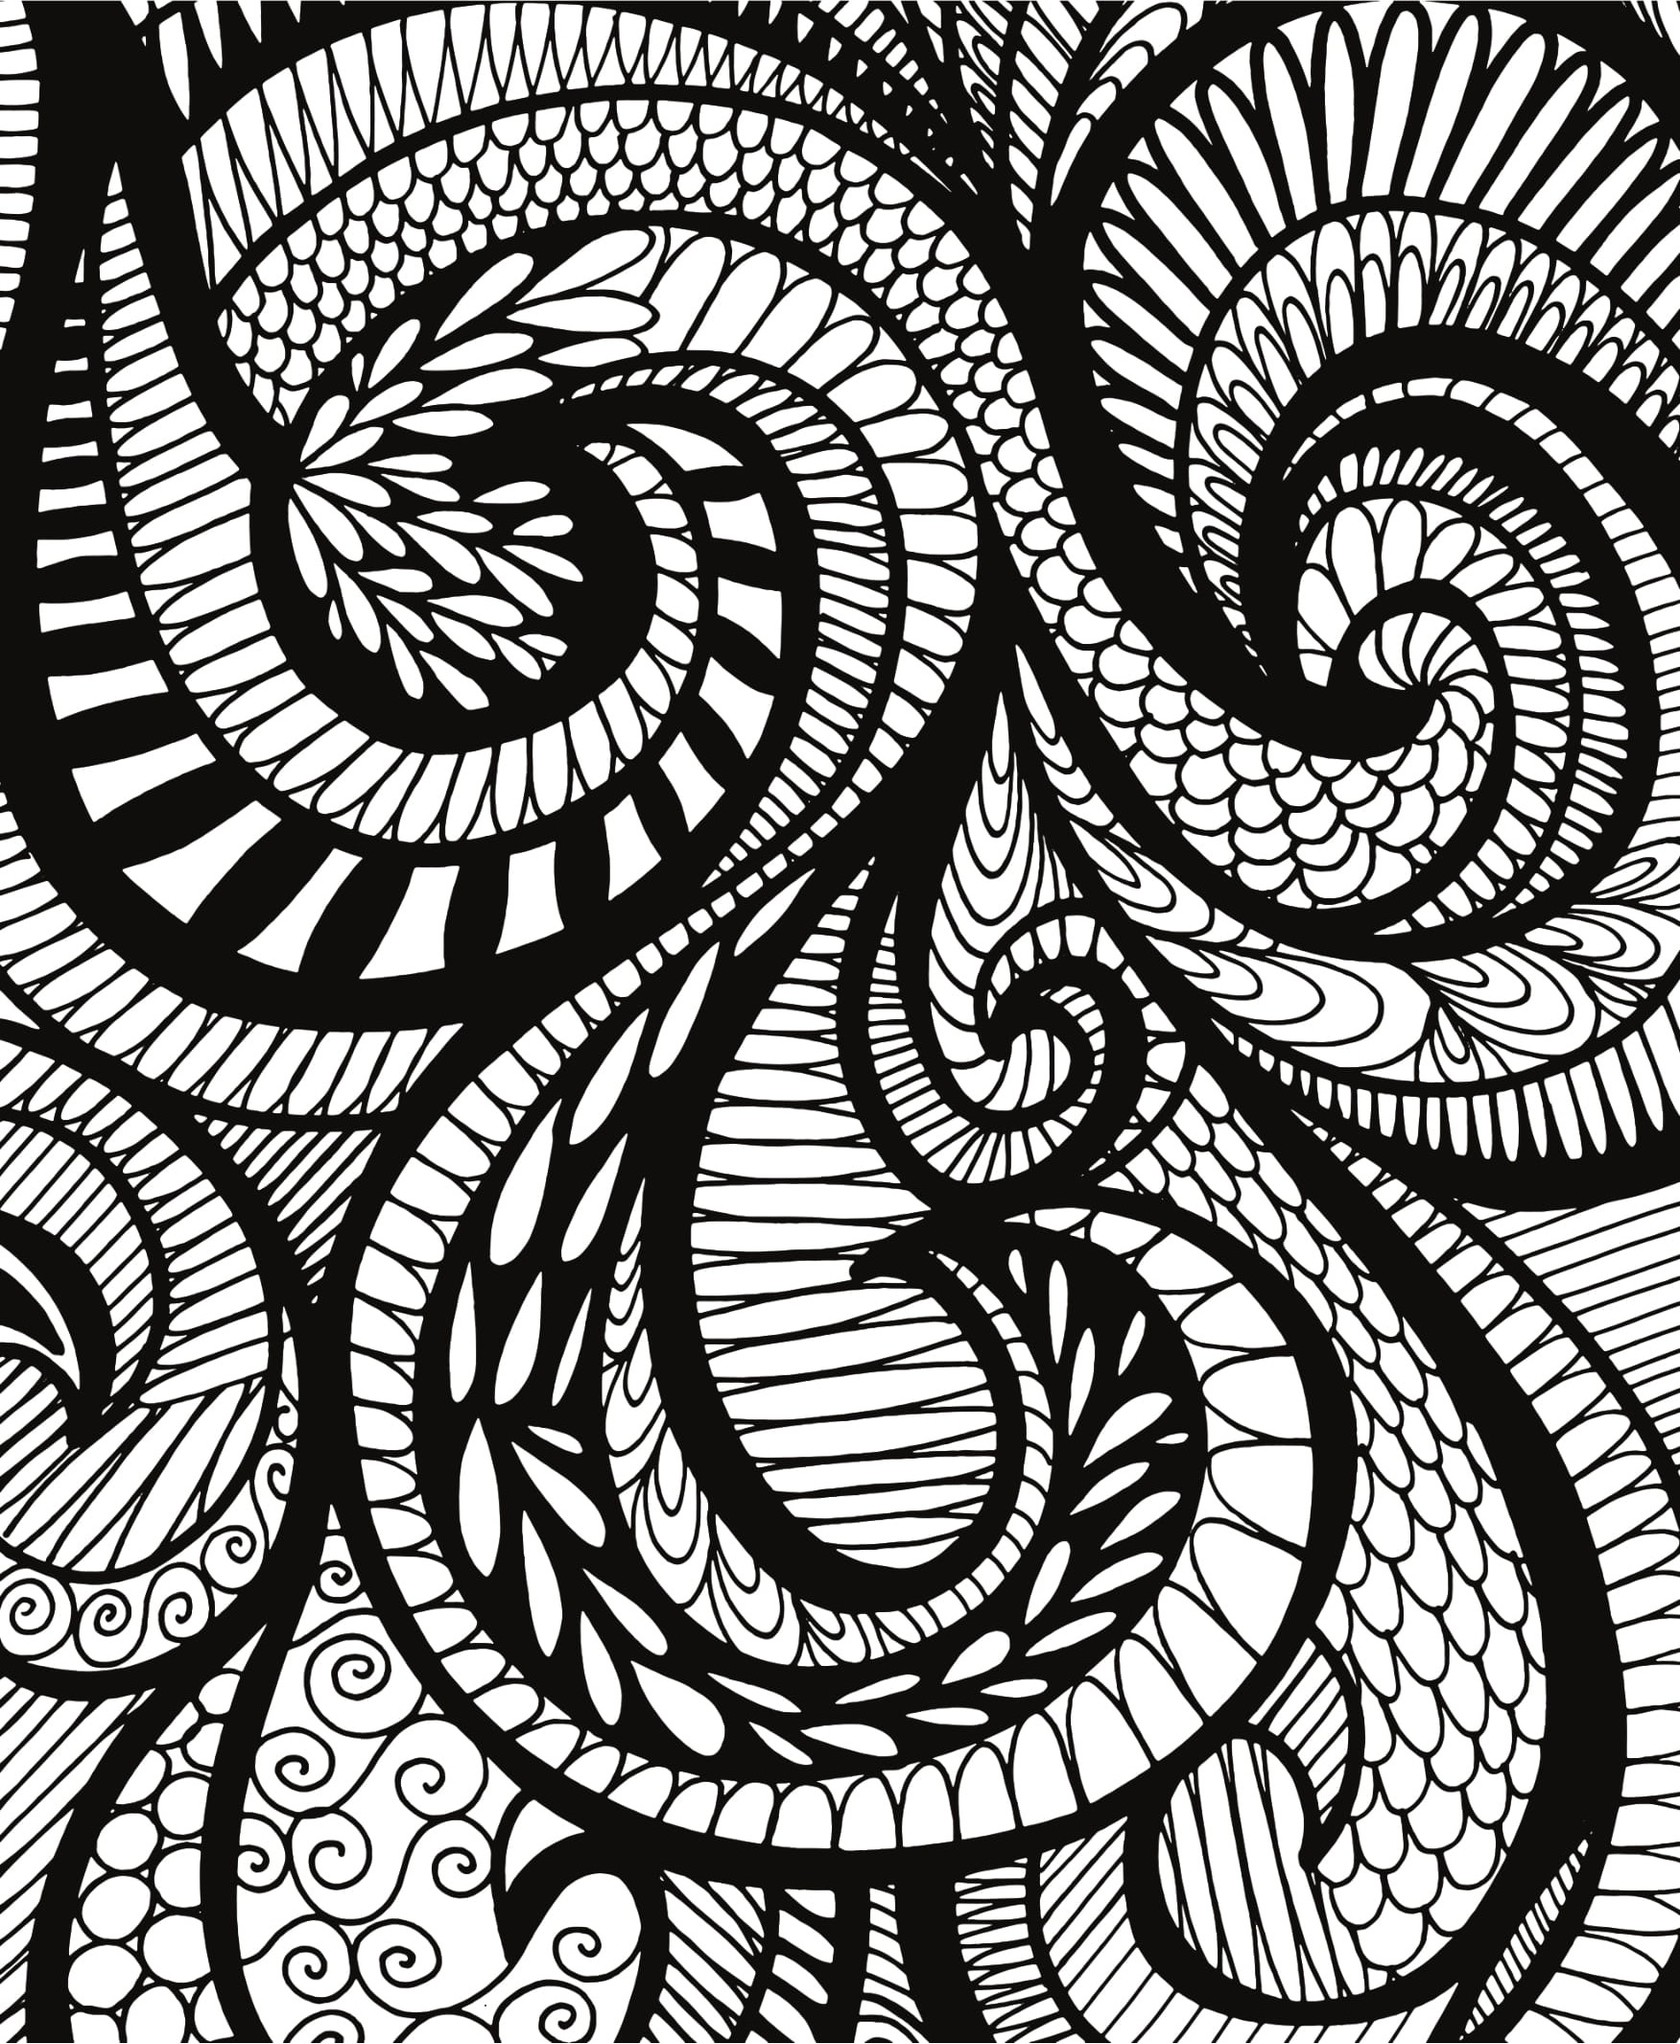 Freebie Friday 08-30-19 Wild Doodles Coloring Page